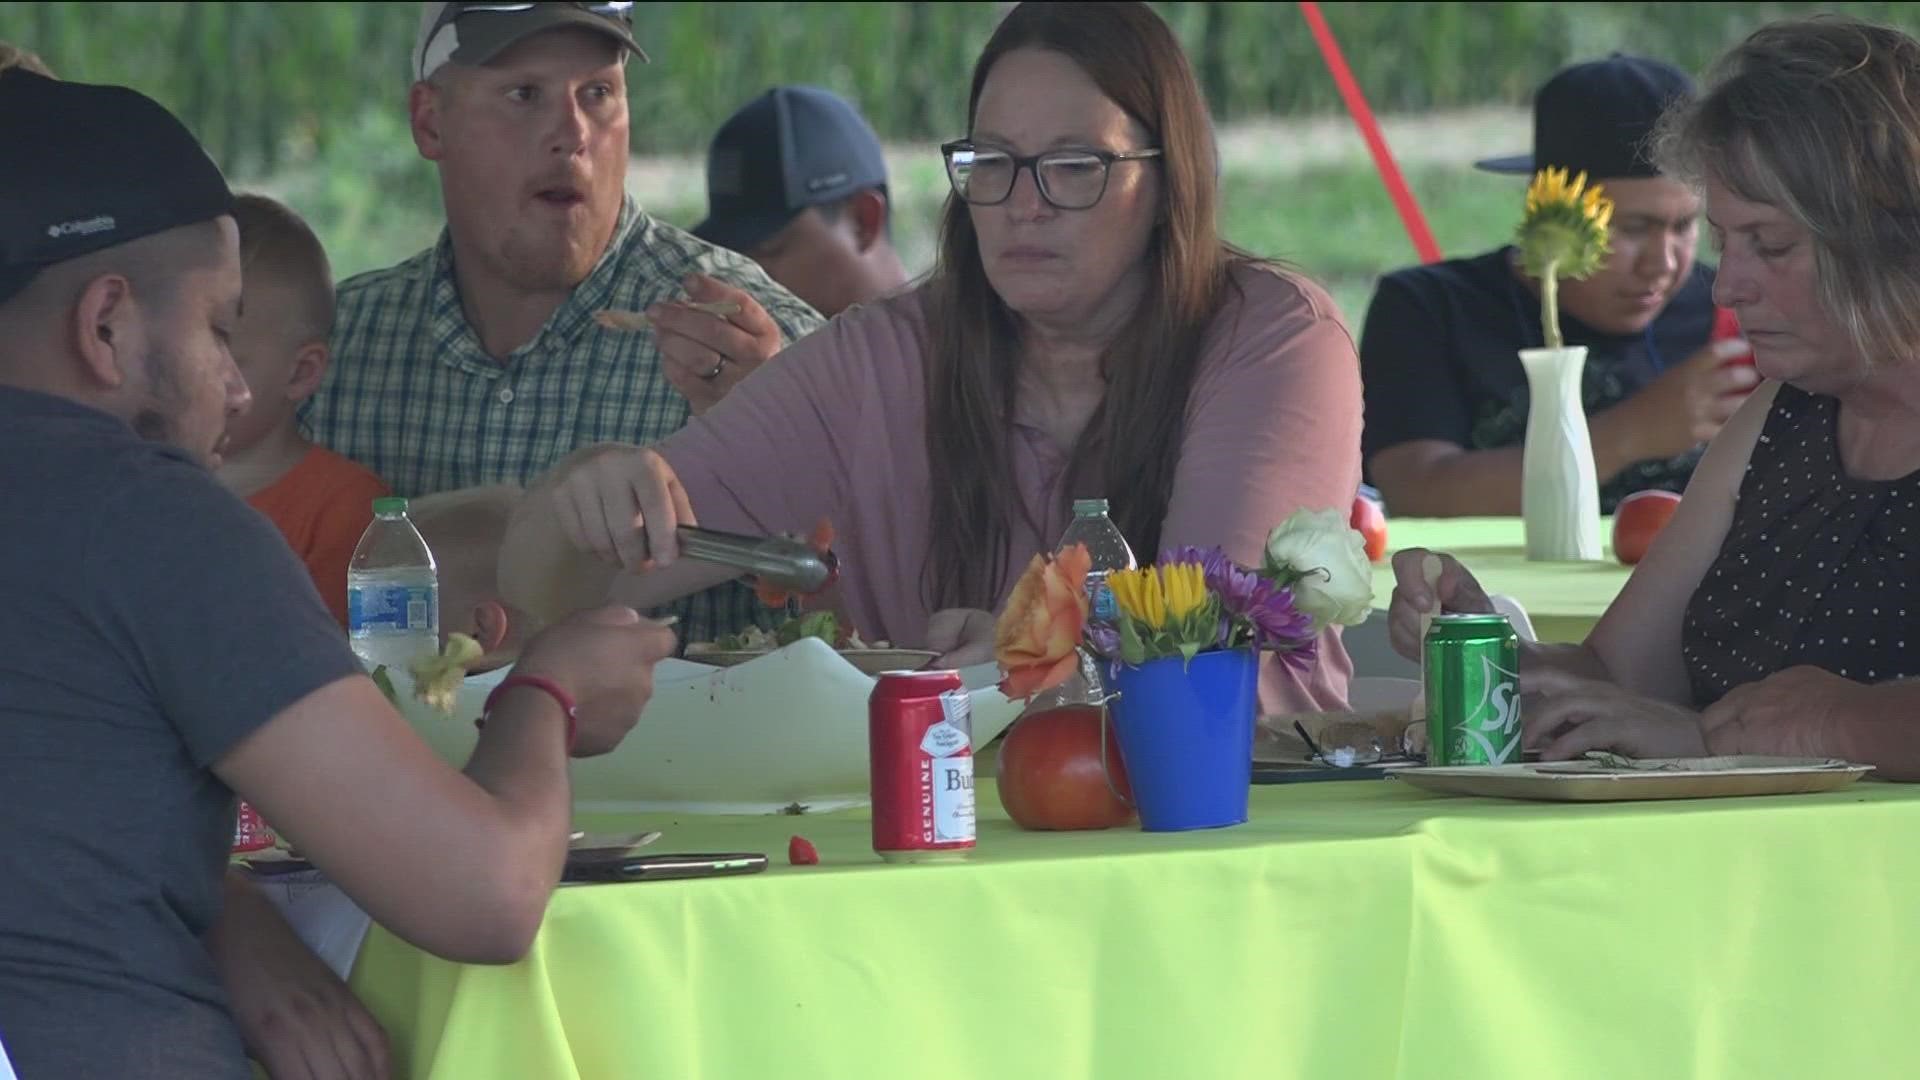 Fremont based group, Justice for Migrant Women hosted a farm-to-table dinner on Saturday to both celebrate and raise awareness for migrant farm workers.